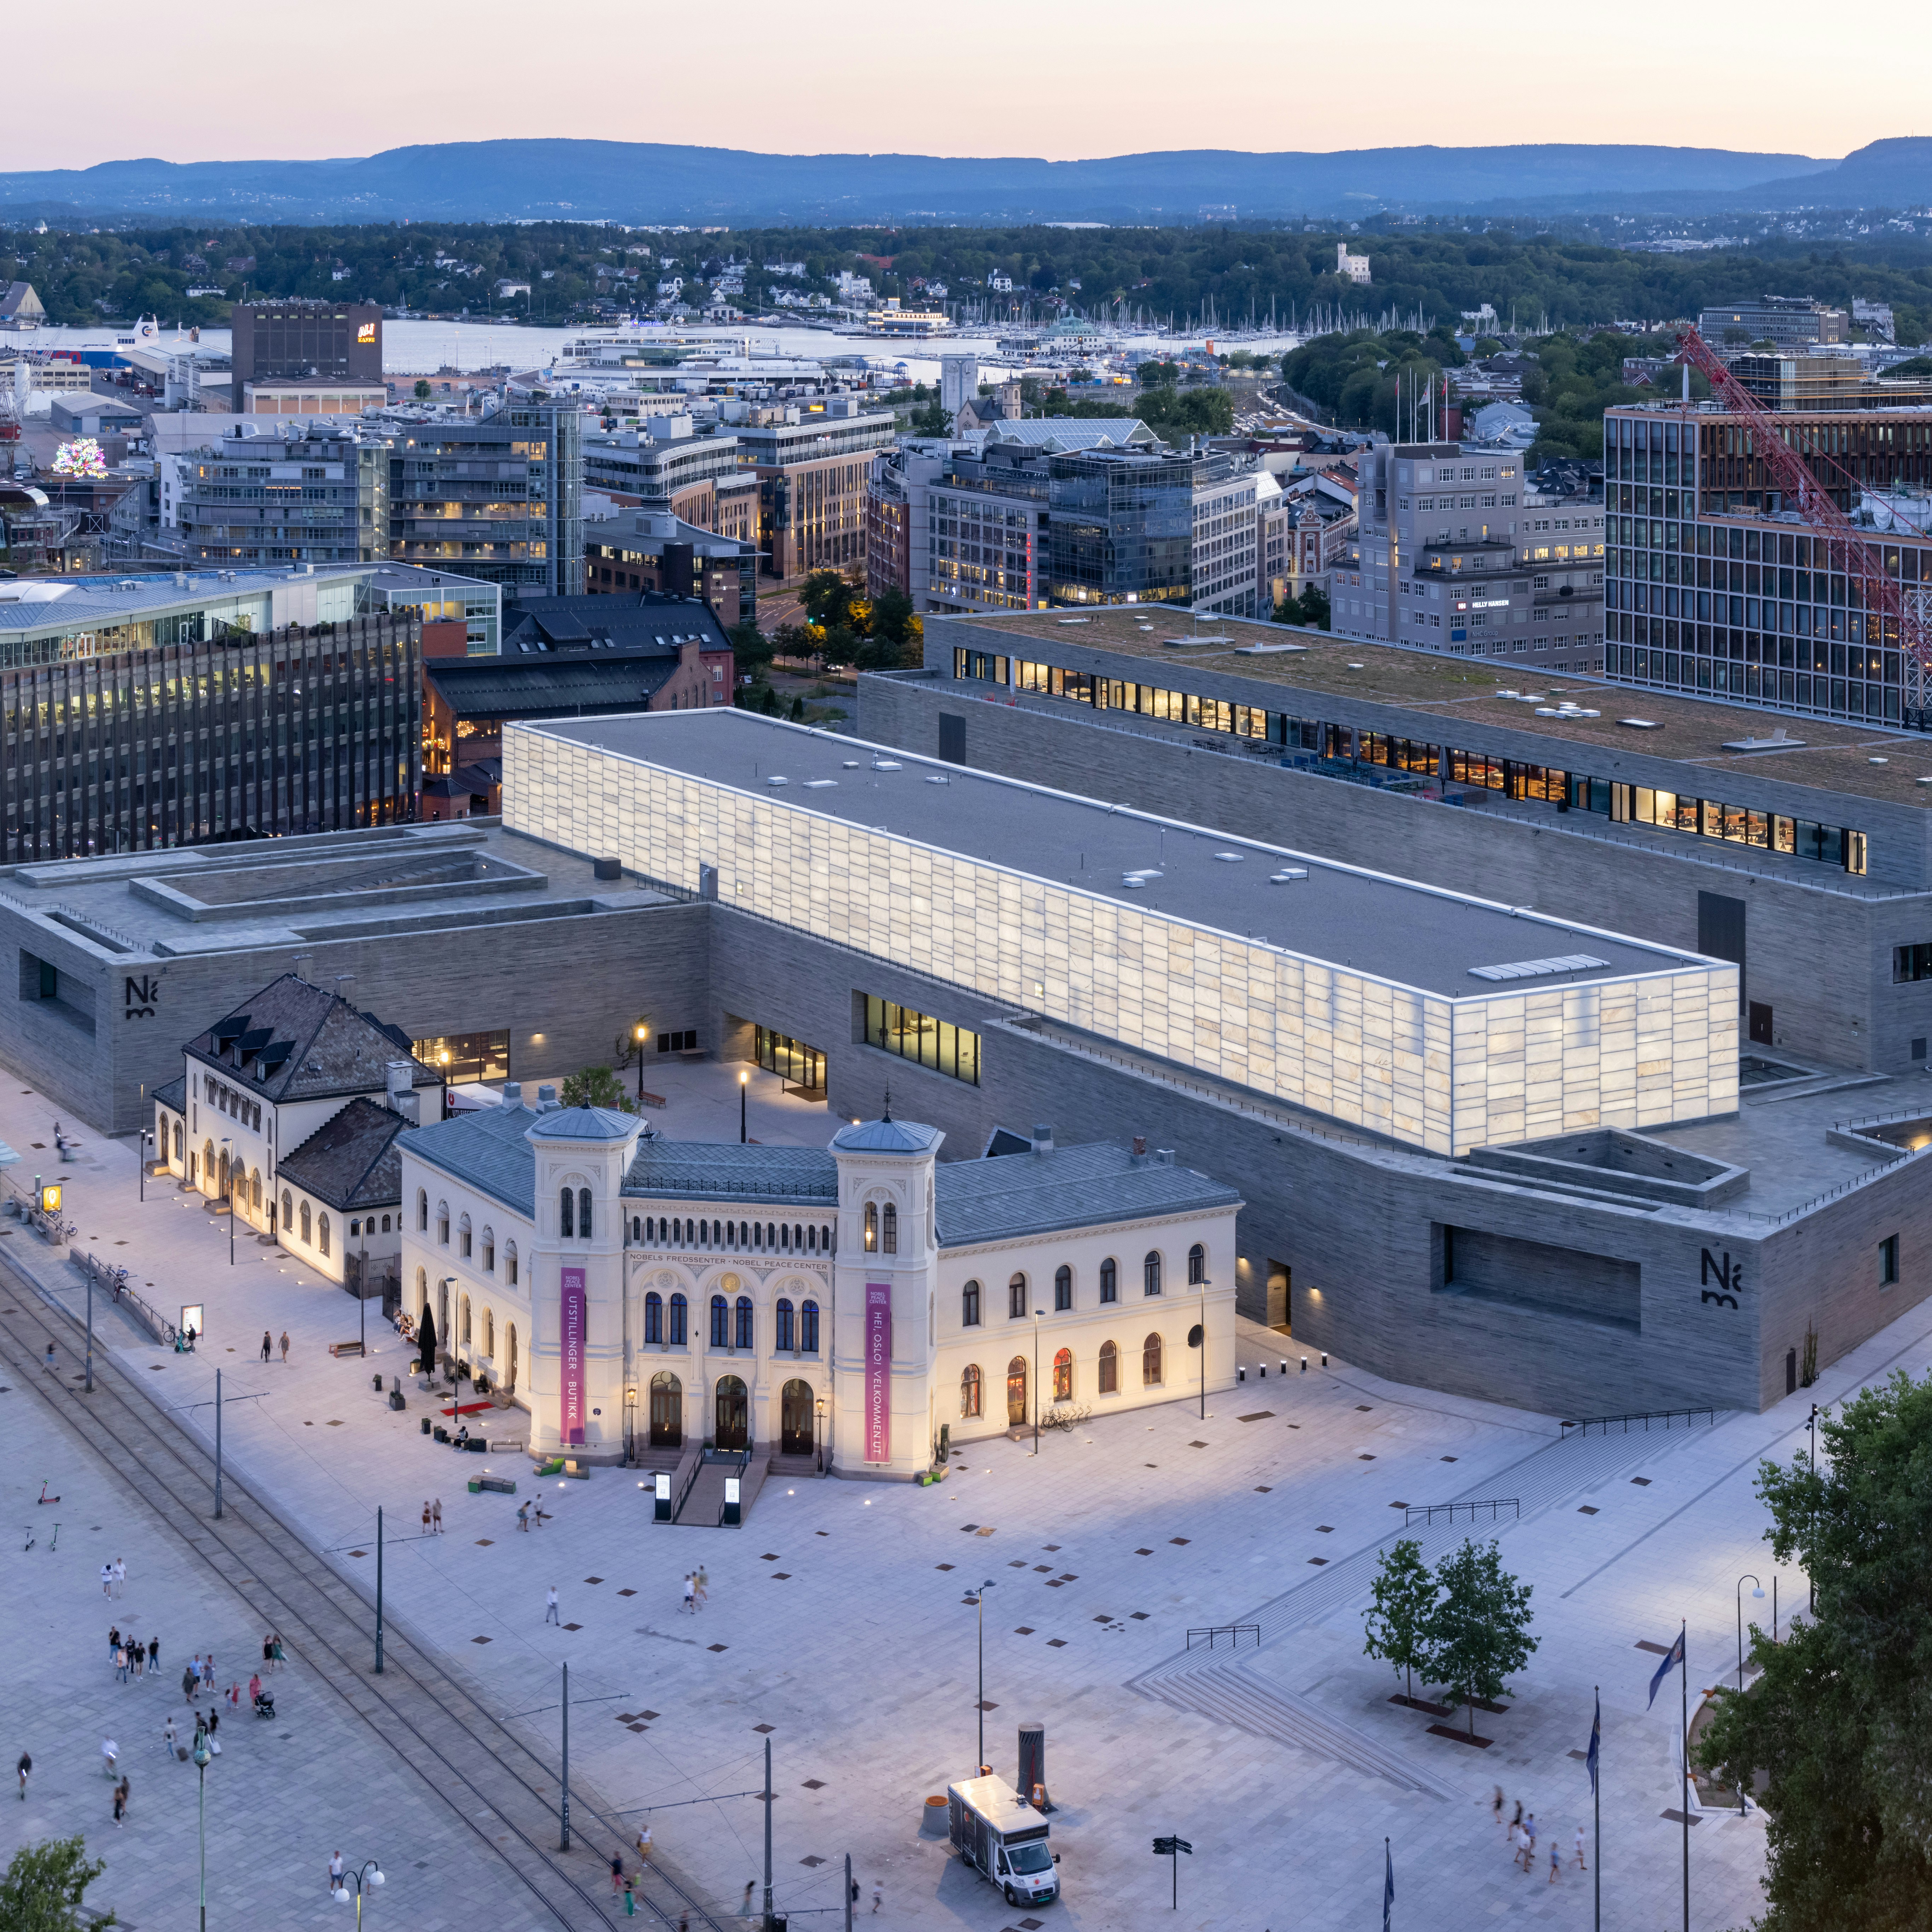 The exterior of the National Museum of Norway